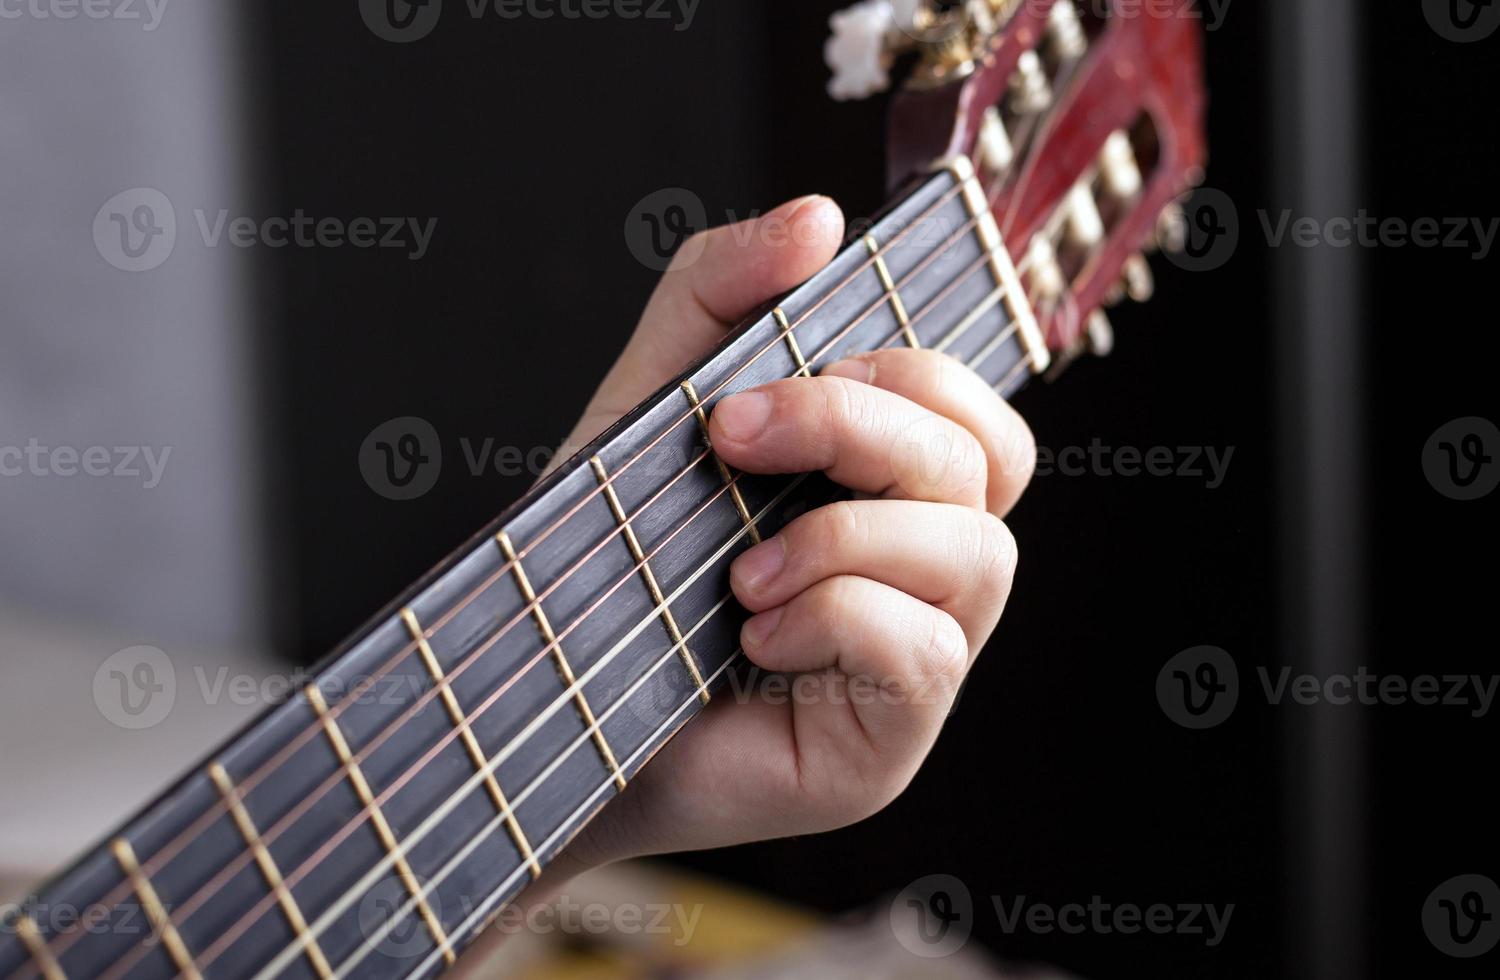 Guitarist's hand squeezes fingers on the chords of an acoustic guitar photo